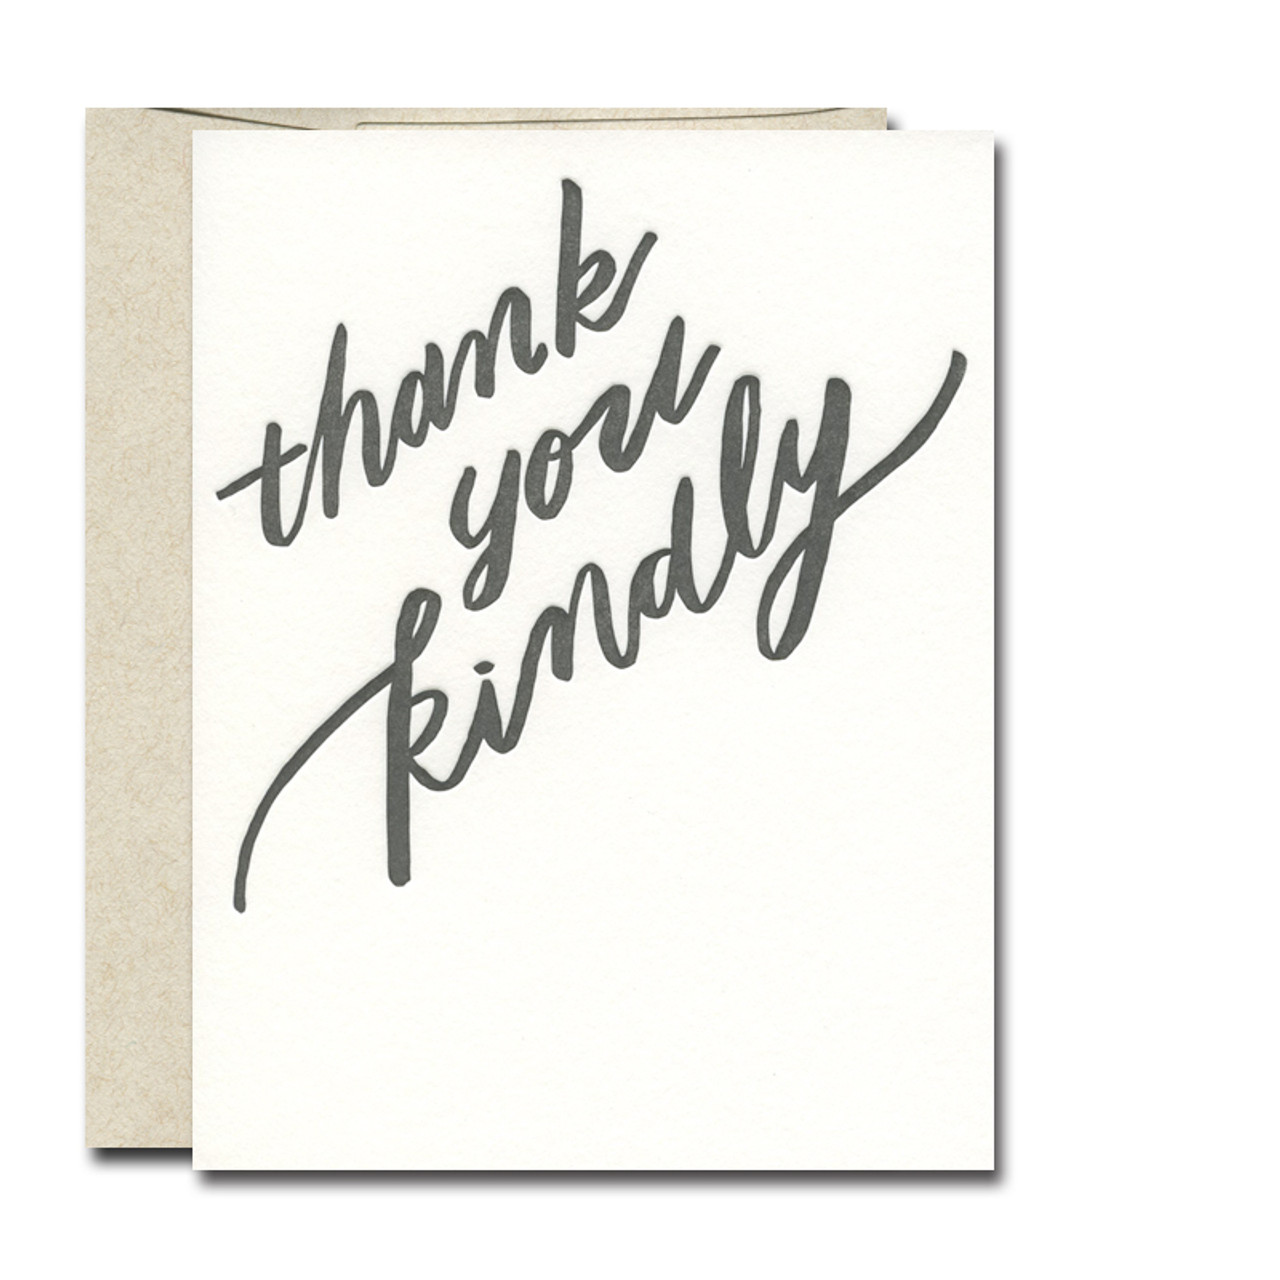 Sweet Words Thank You - Boxed Thank You Cards, Box of 15